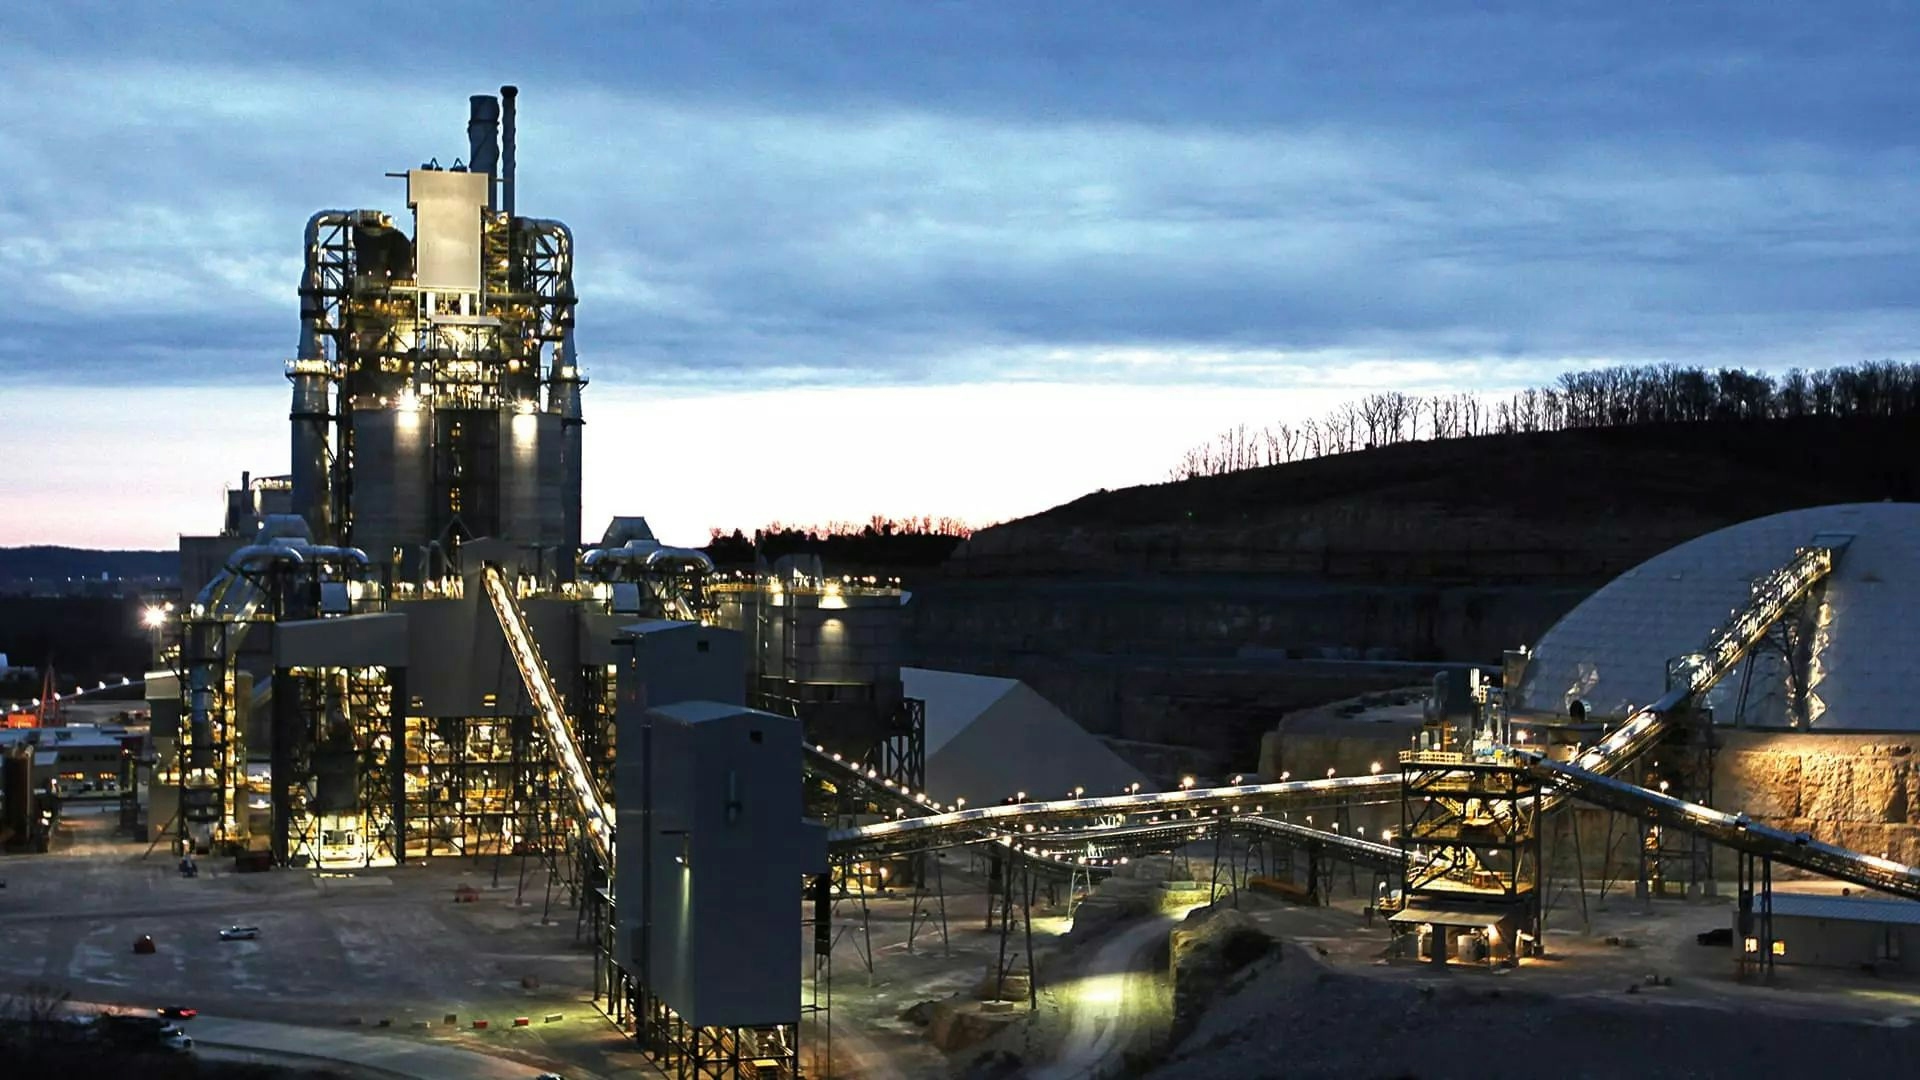 cement plant by night